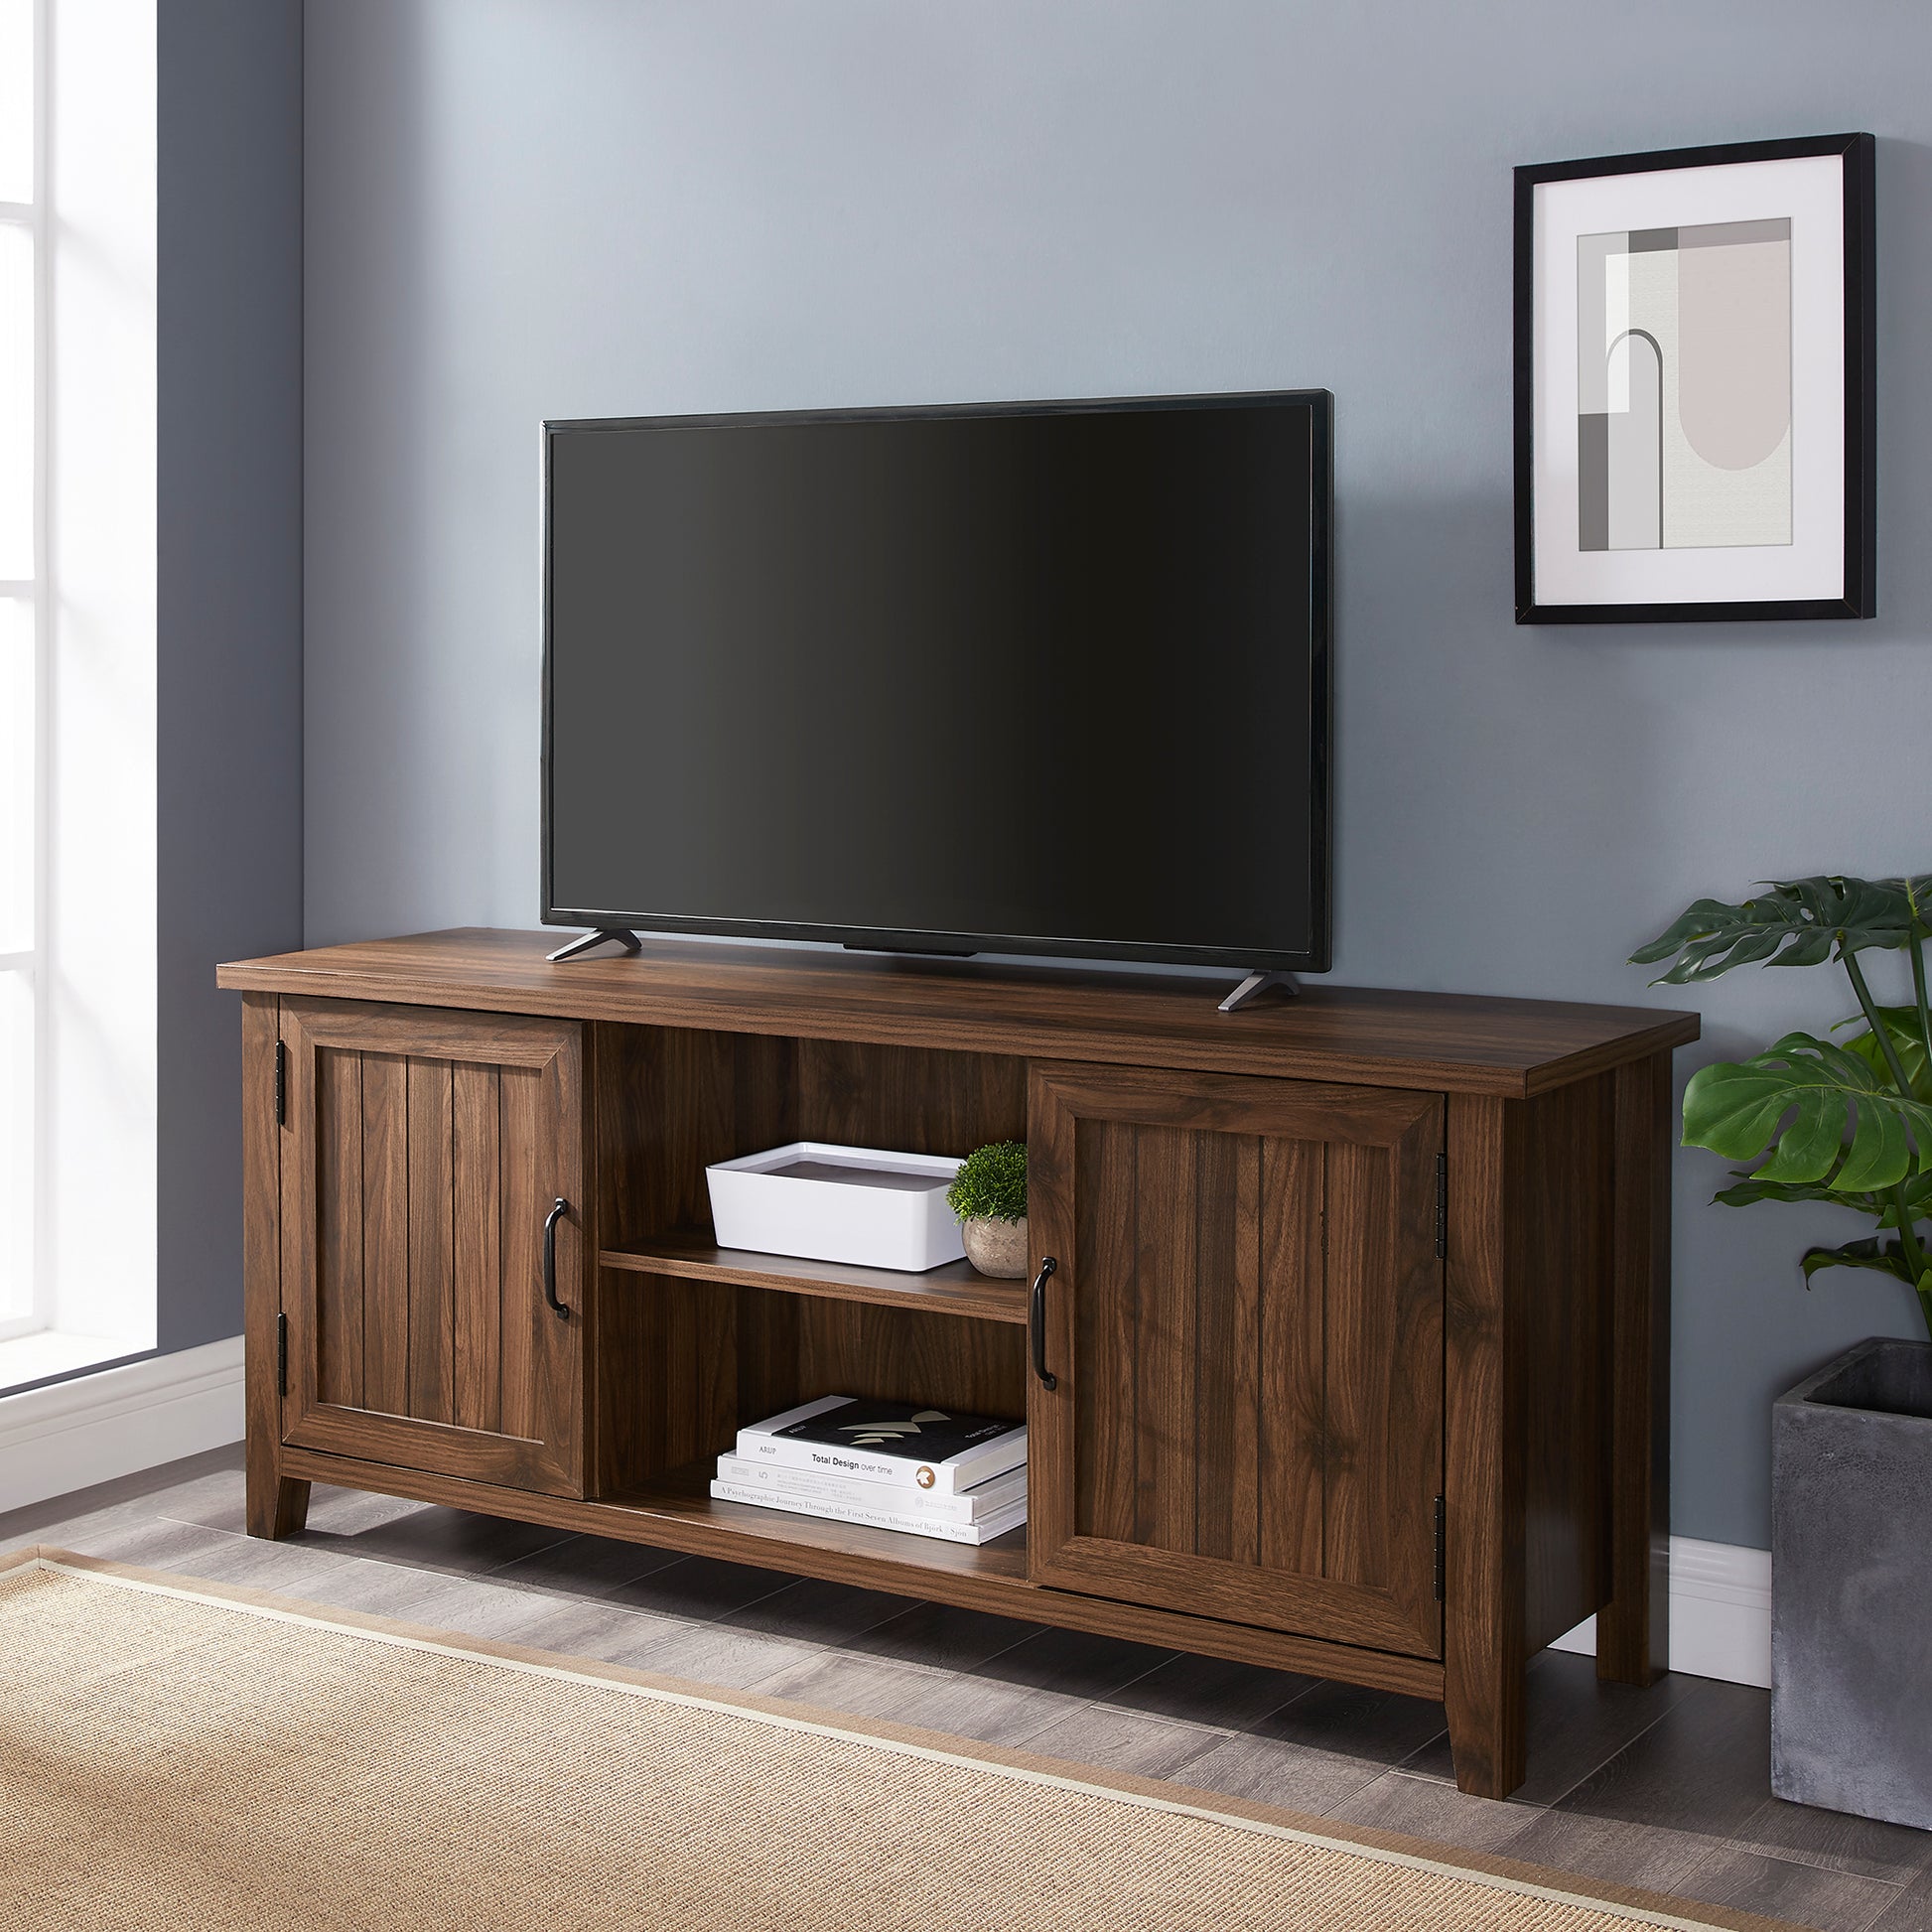 Classic Grooved Door Tv Stand For Tvs Up To 65"